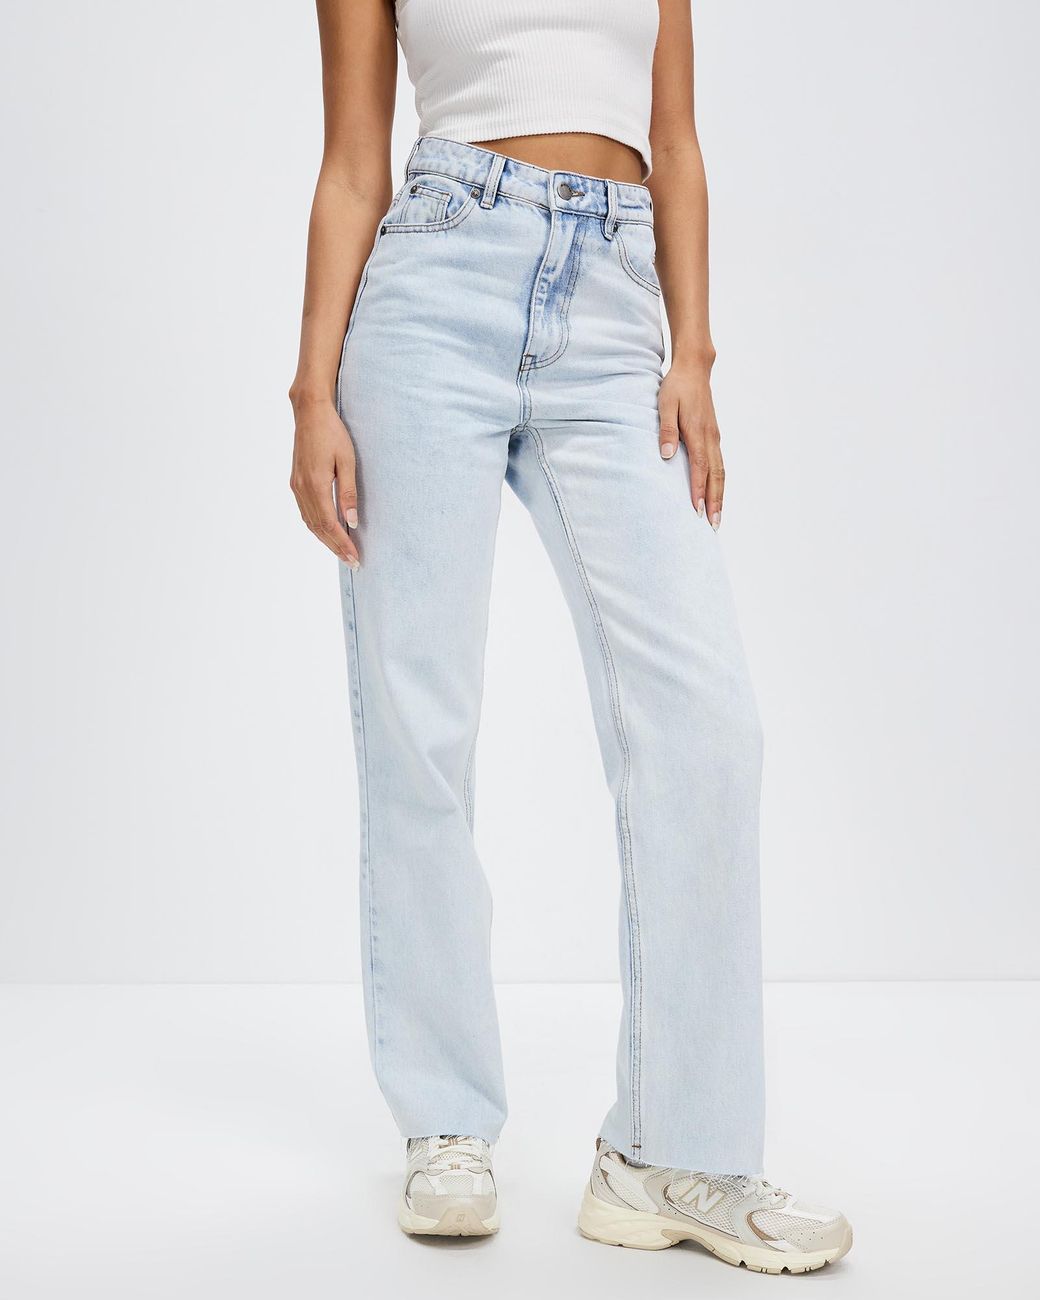 All About Eve Skye High Rise Straight Leg Jeans in Blue | Lyst Australia